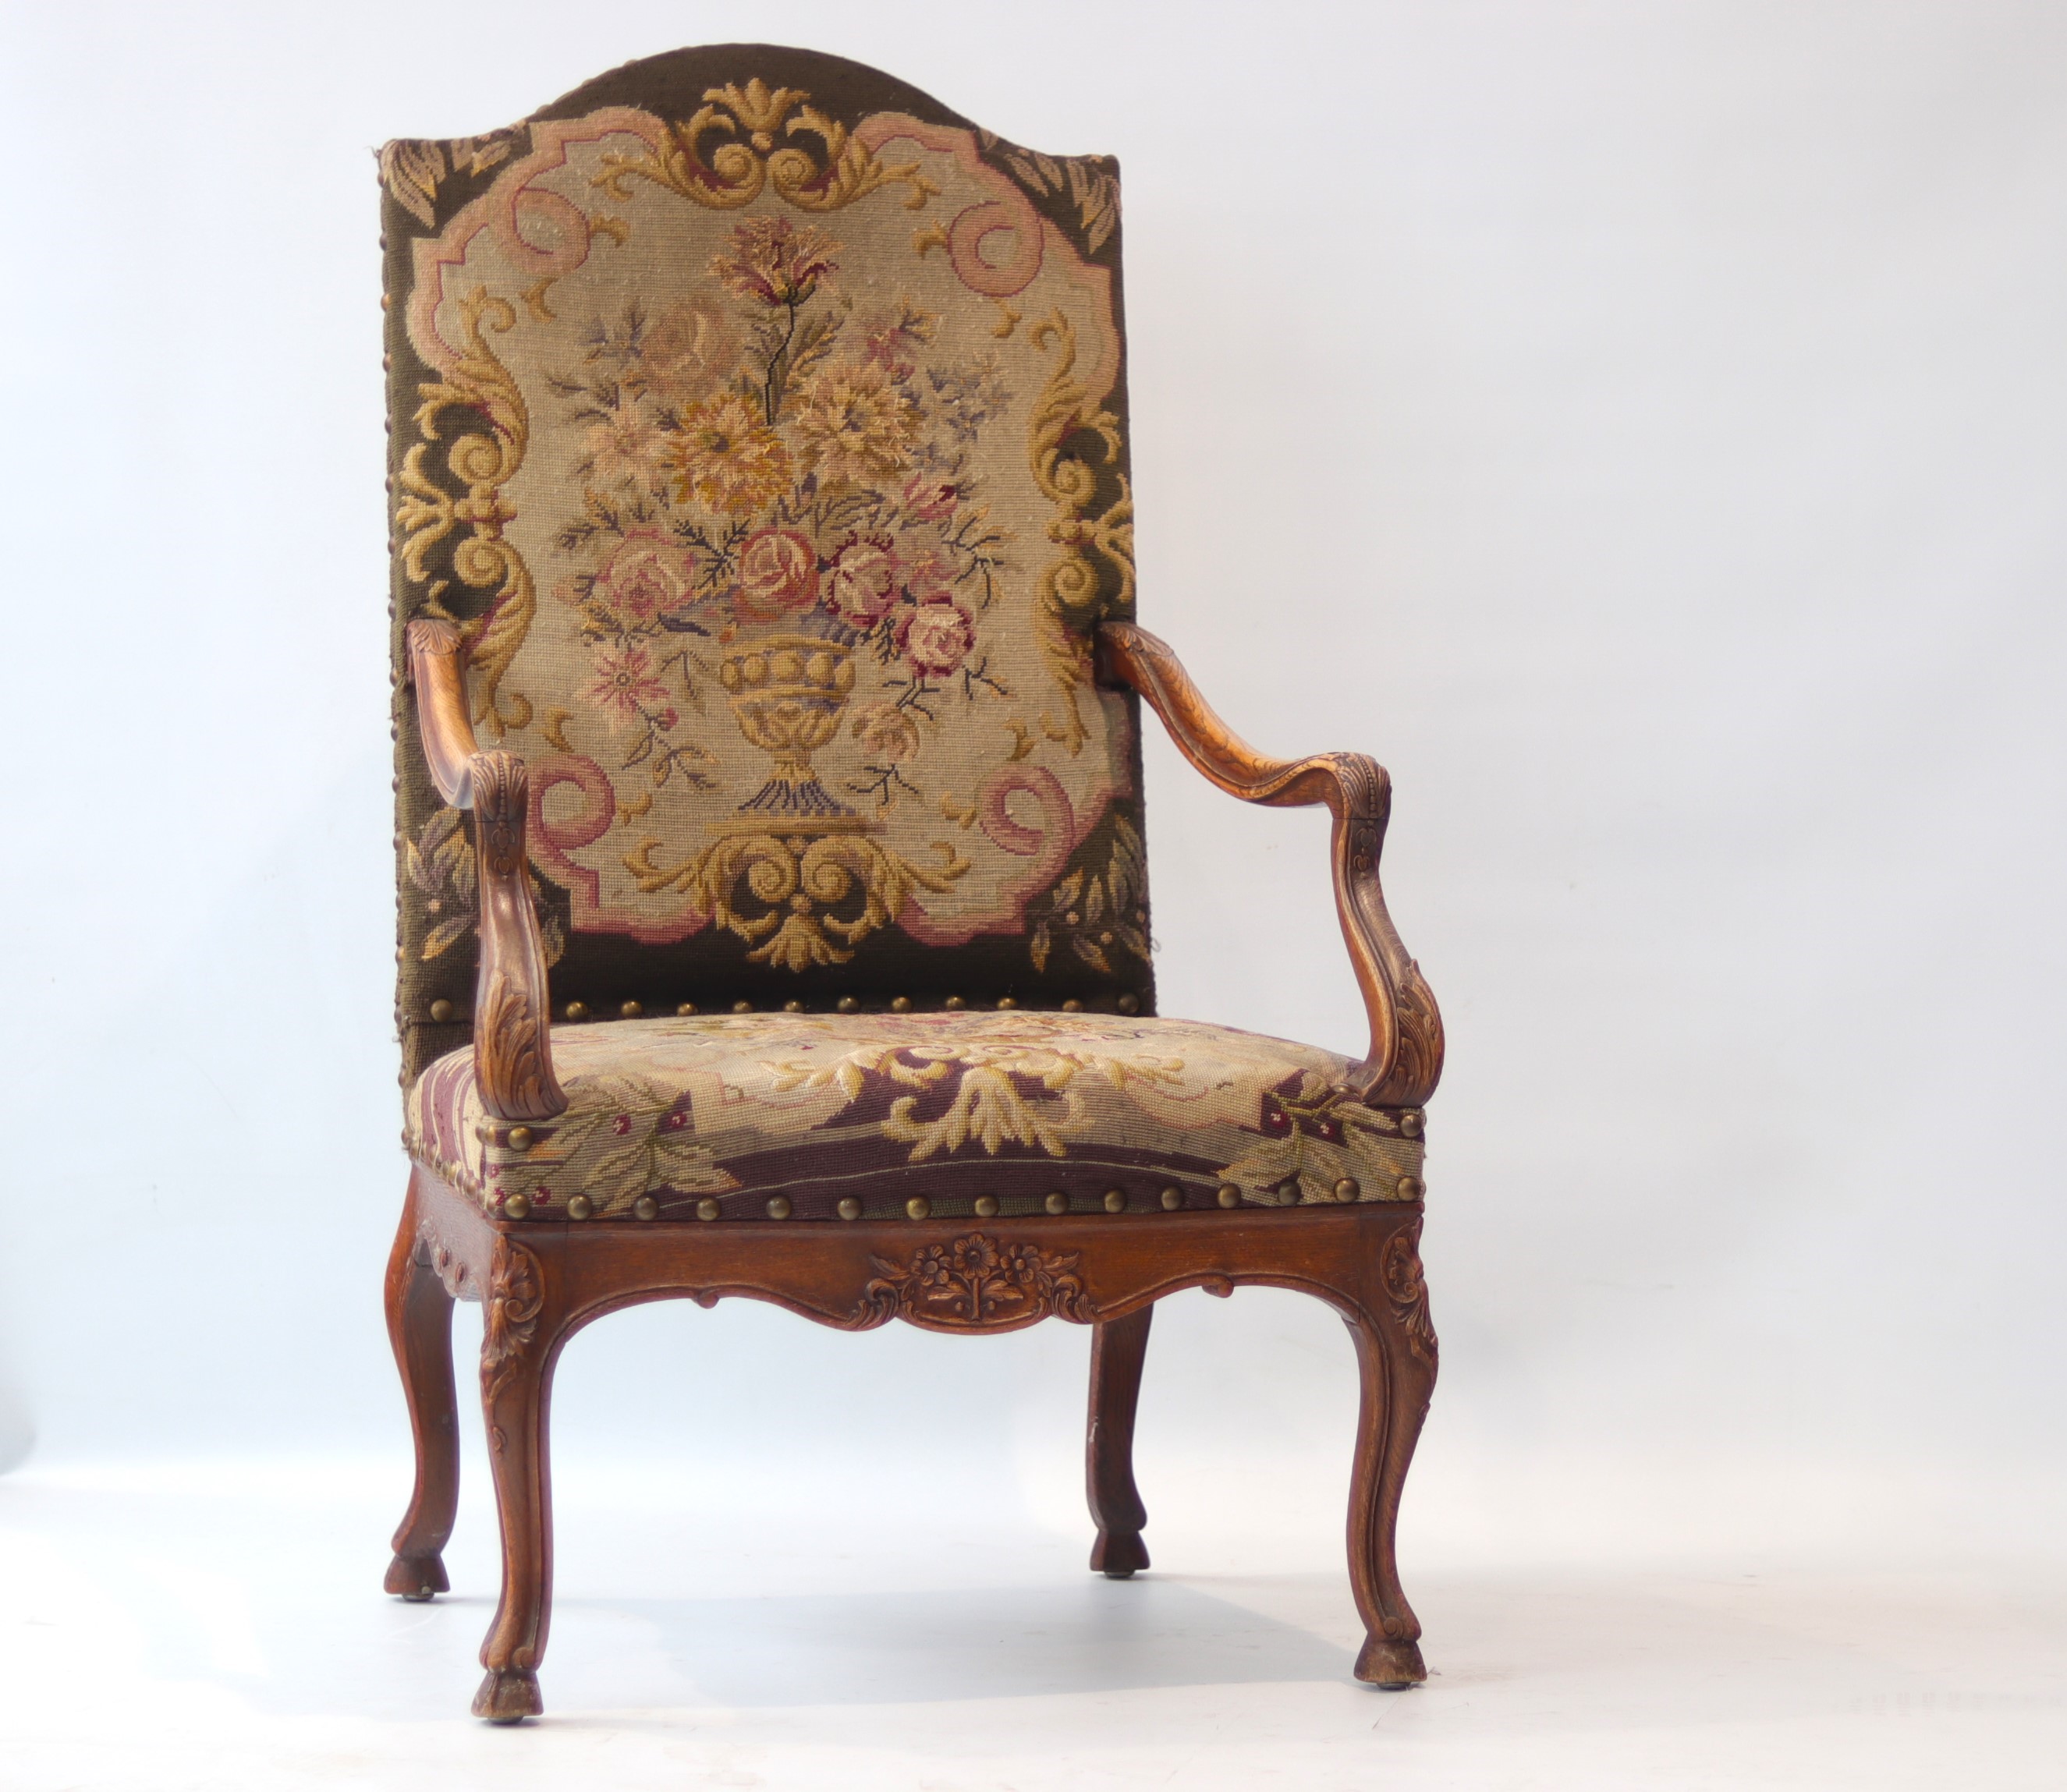 Carved wooden armchair and a seat with floral motifs from the 18th century